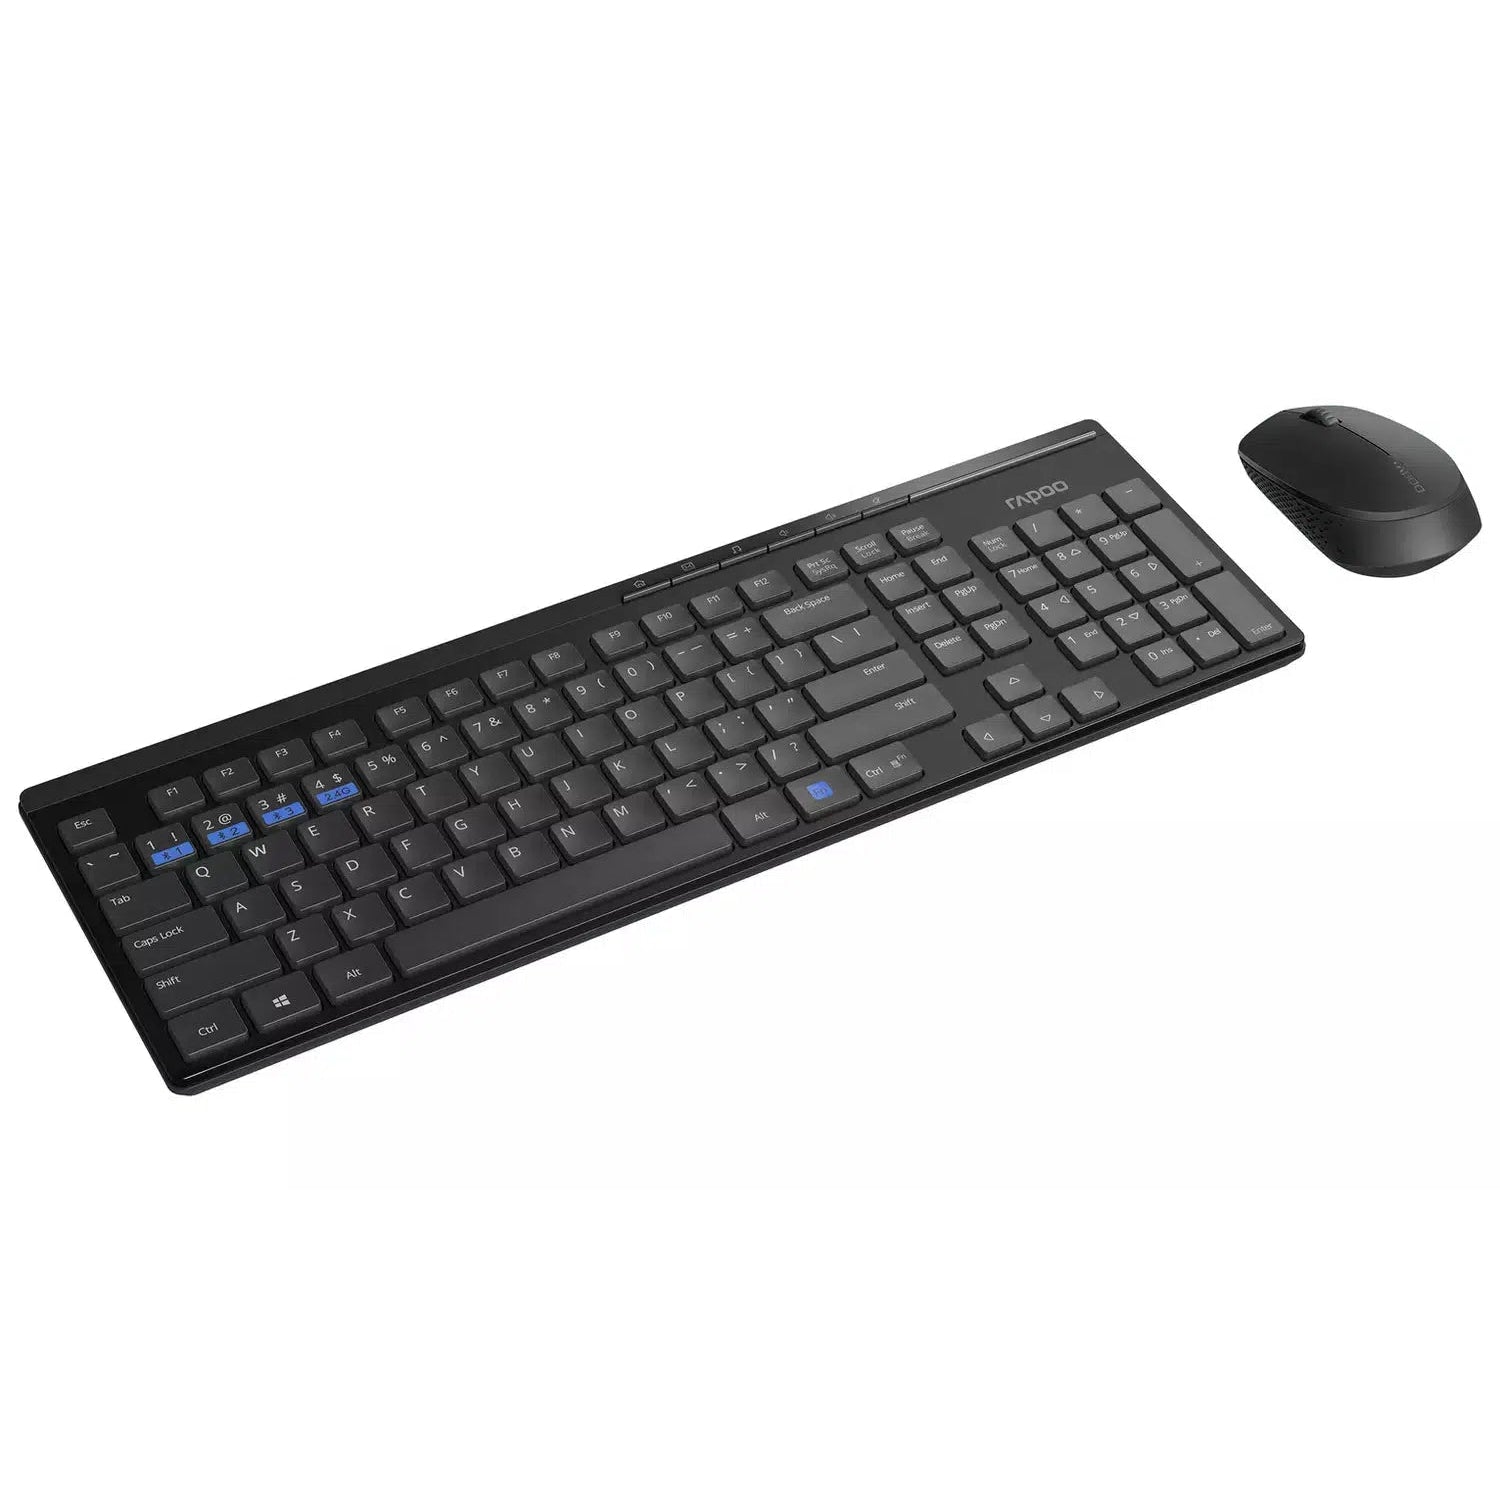 Rapoo 8100M Multi-Mode Wireless Mouse and Keyboard, Black - Refurbished Excellent